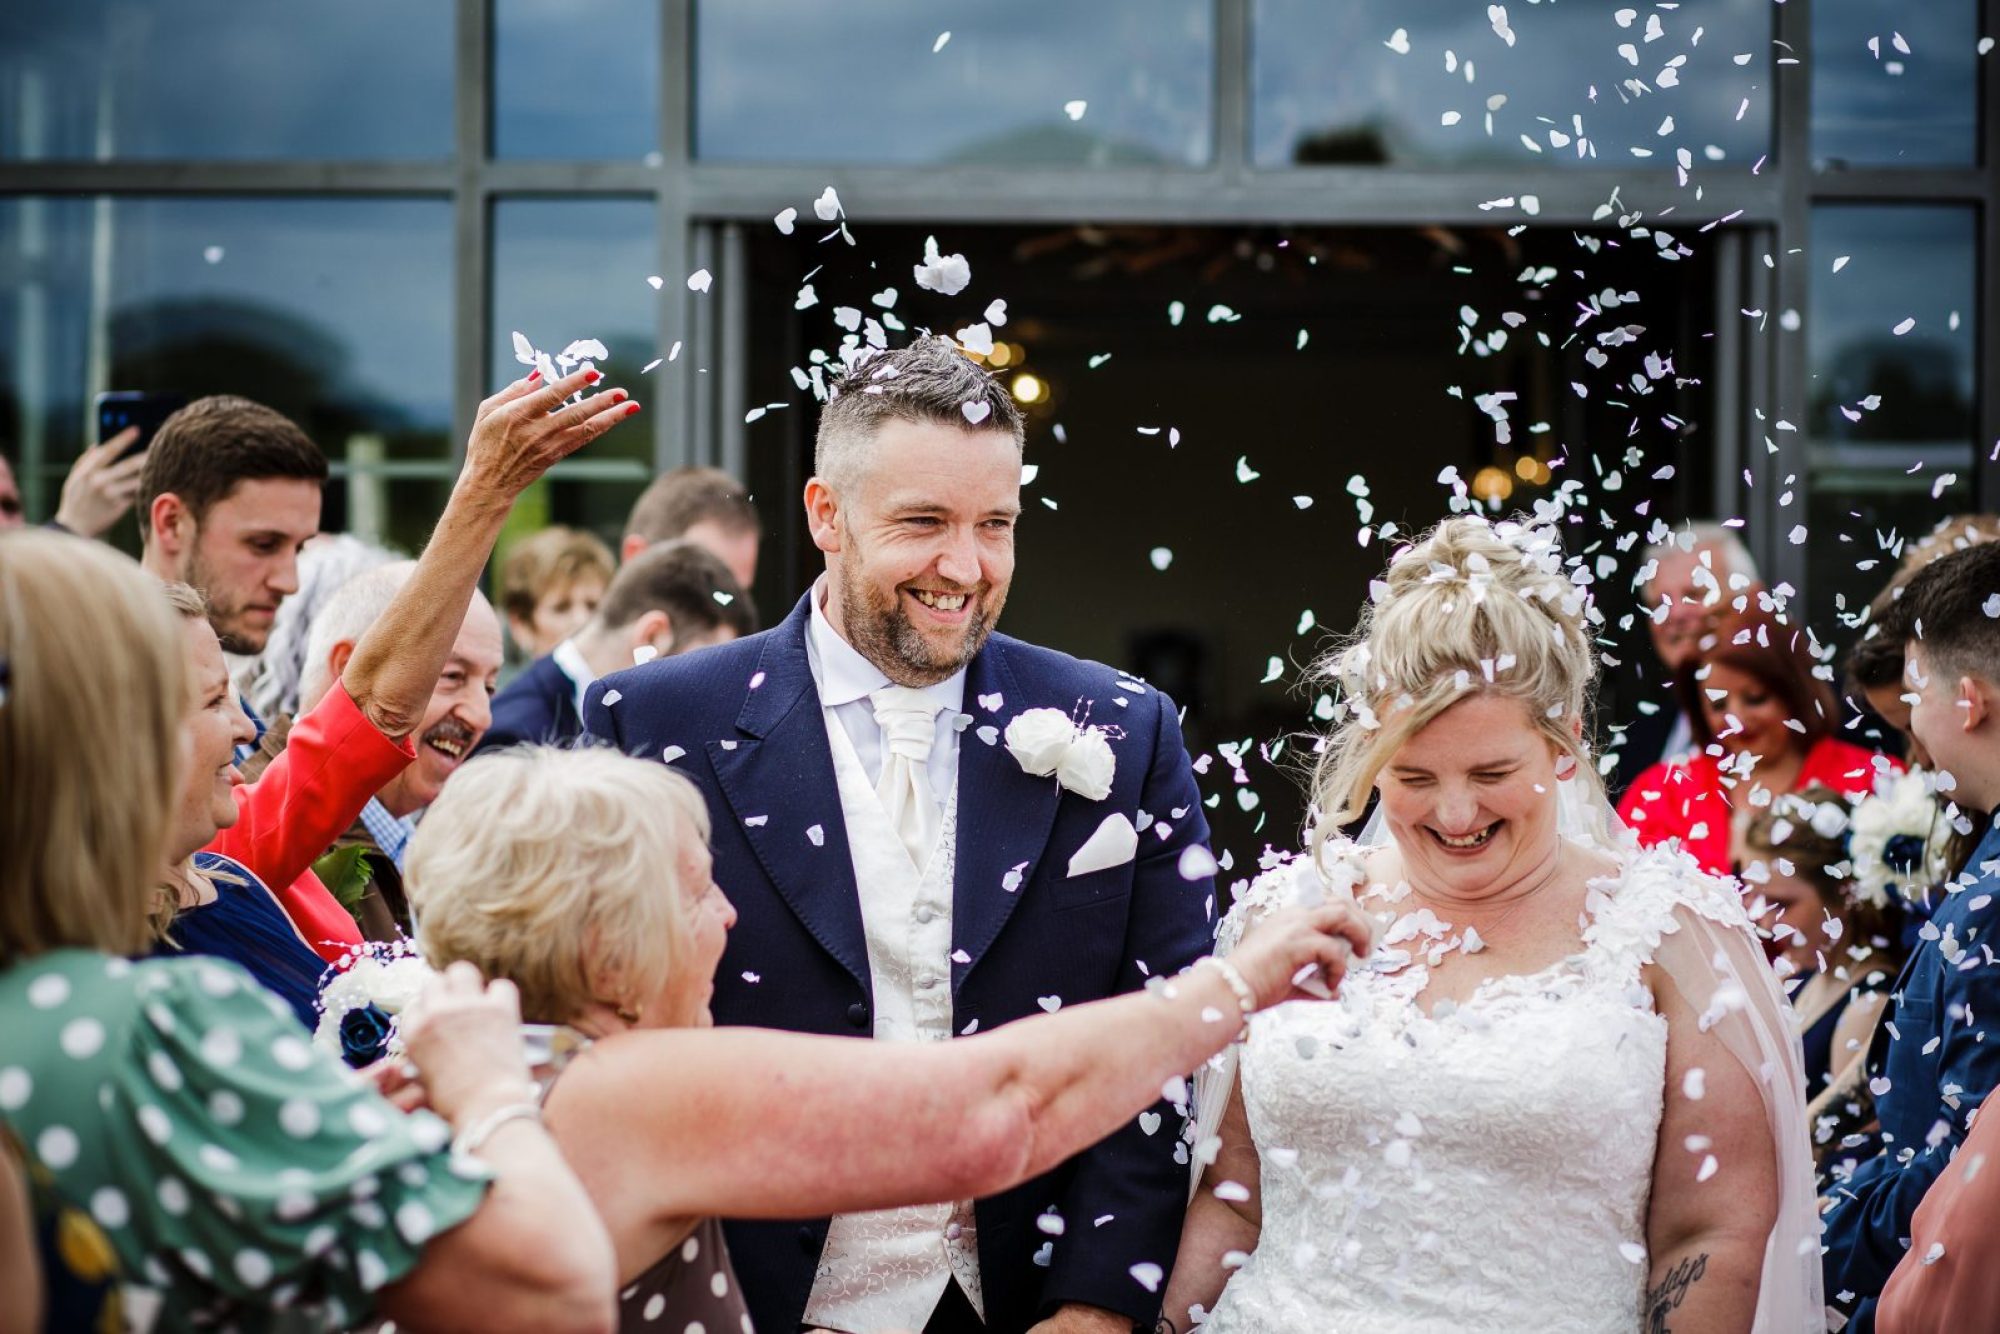 Wedding guests throwing confetti on happy couple on their wedding day in Nottingham